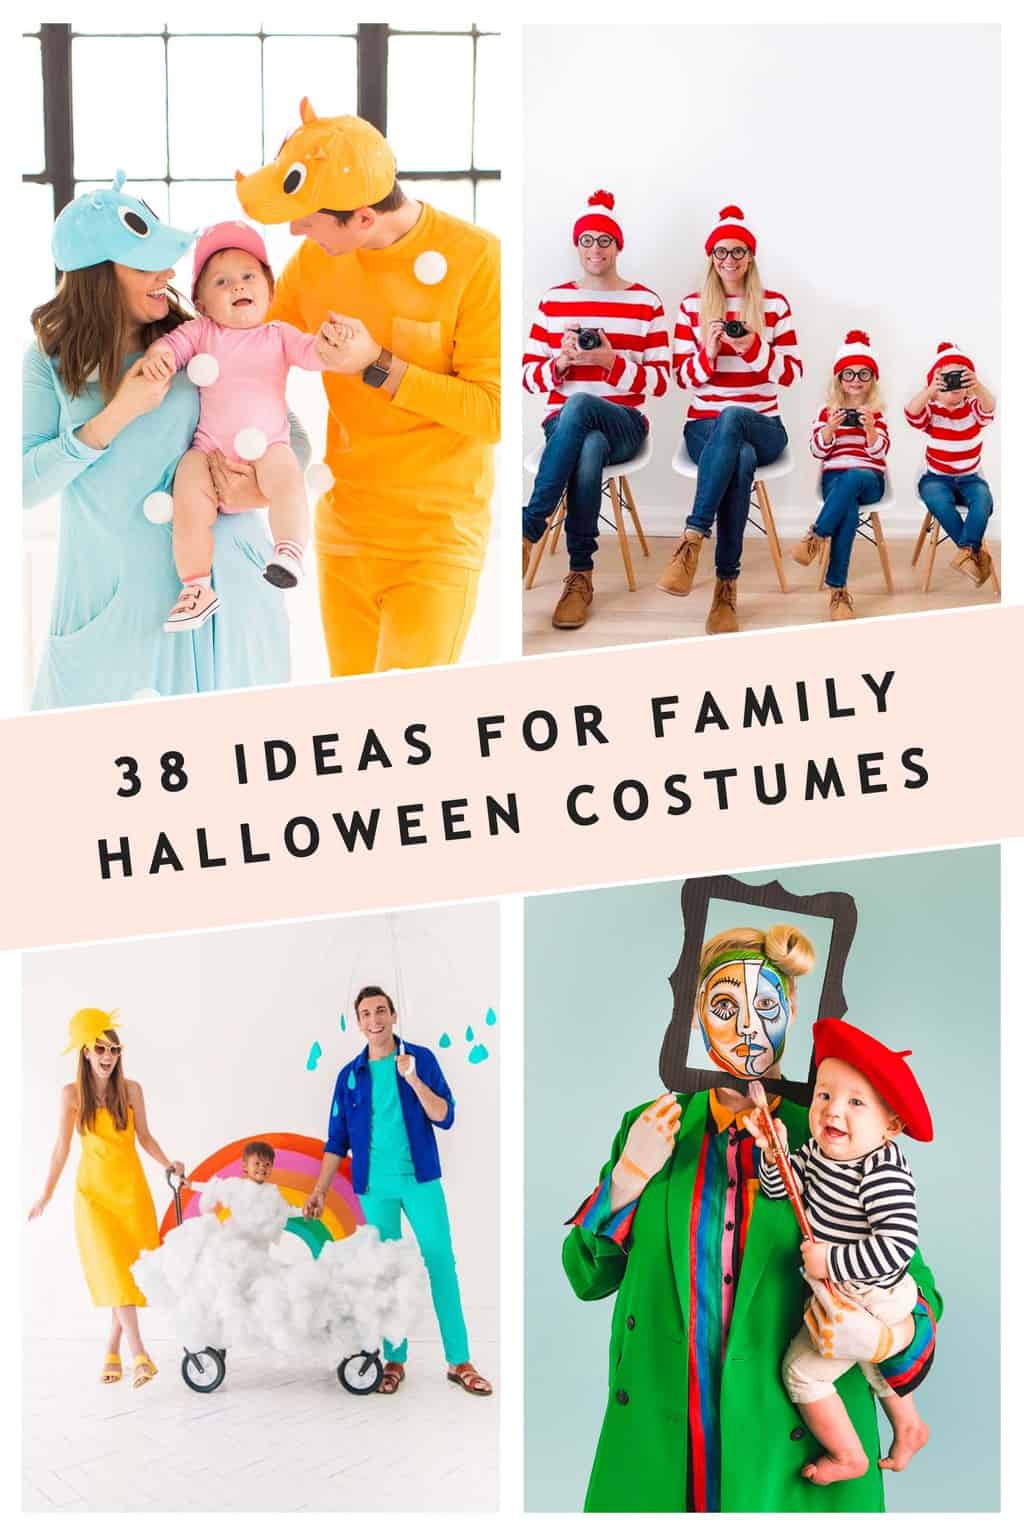 Family Costume Ideas: 16 Ideas for Family Halloween Costumes